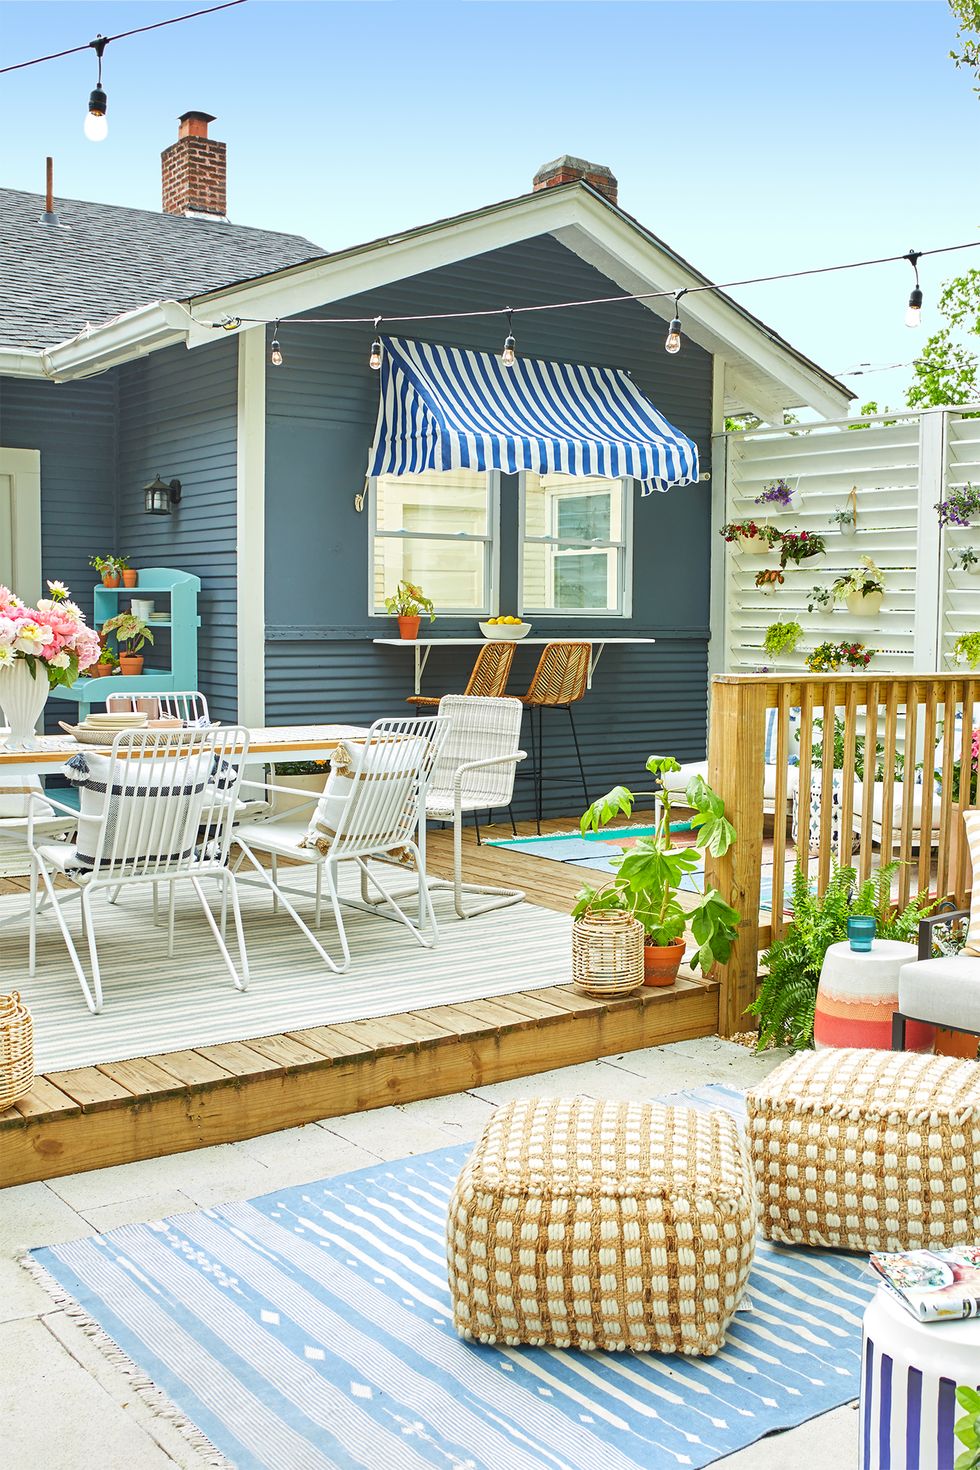 26 Small Backyard Ideas to Transform Even the Tiniest Spaces